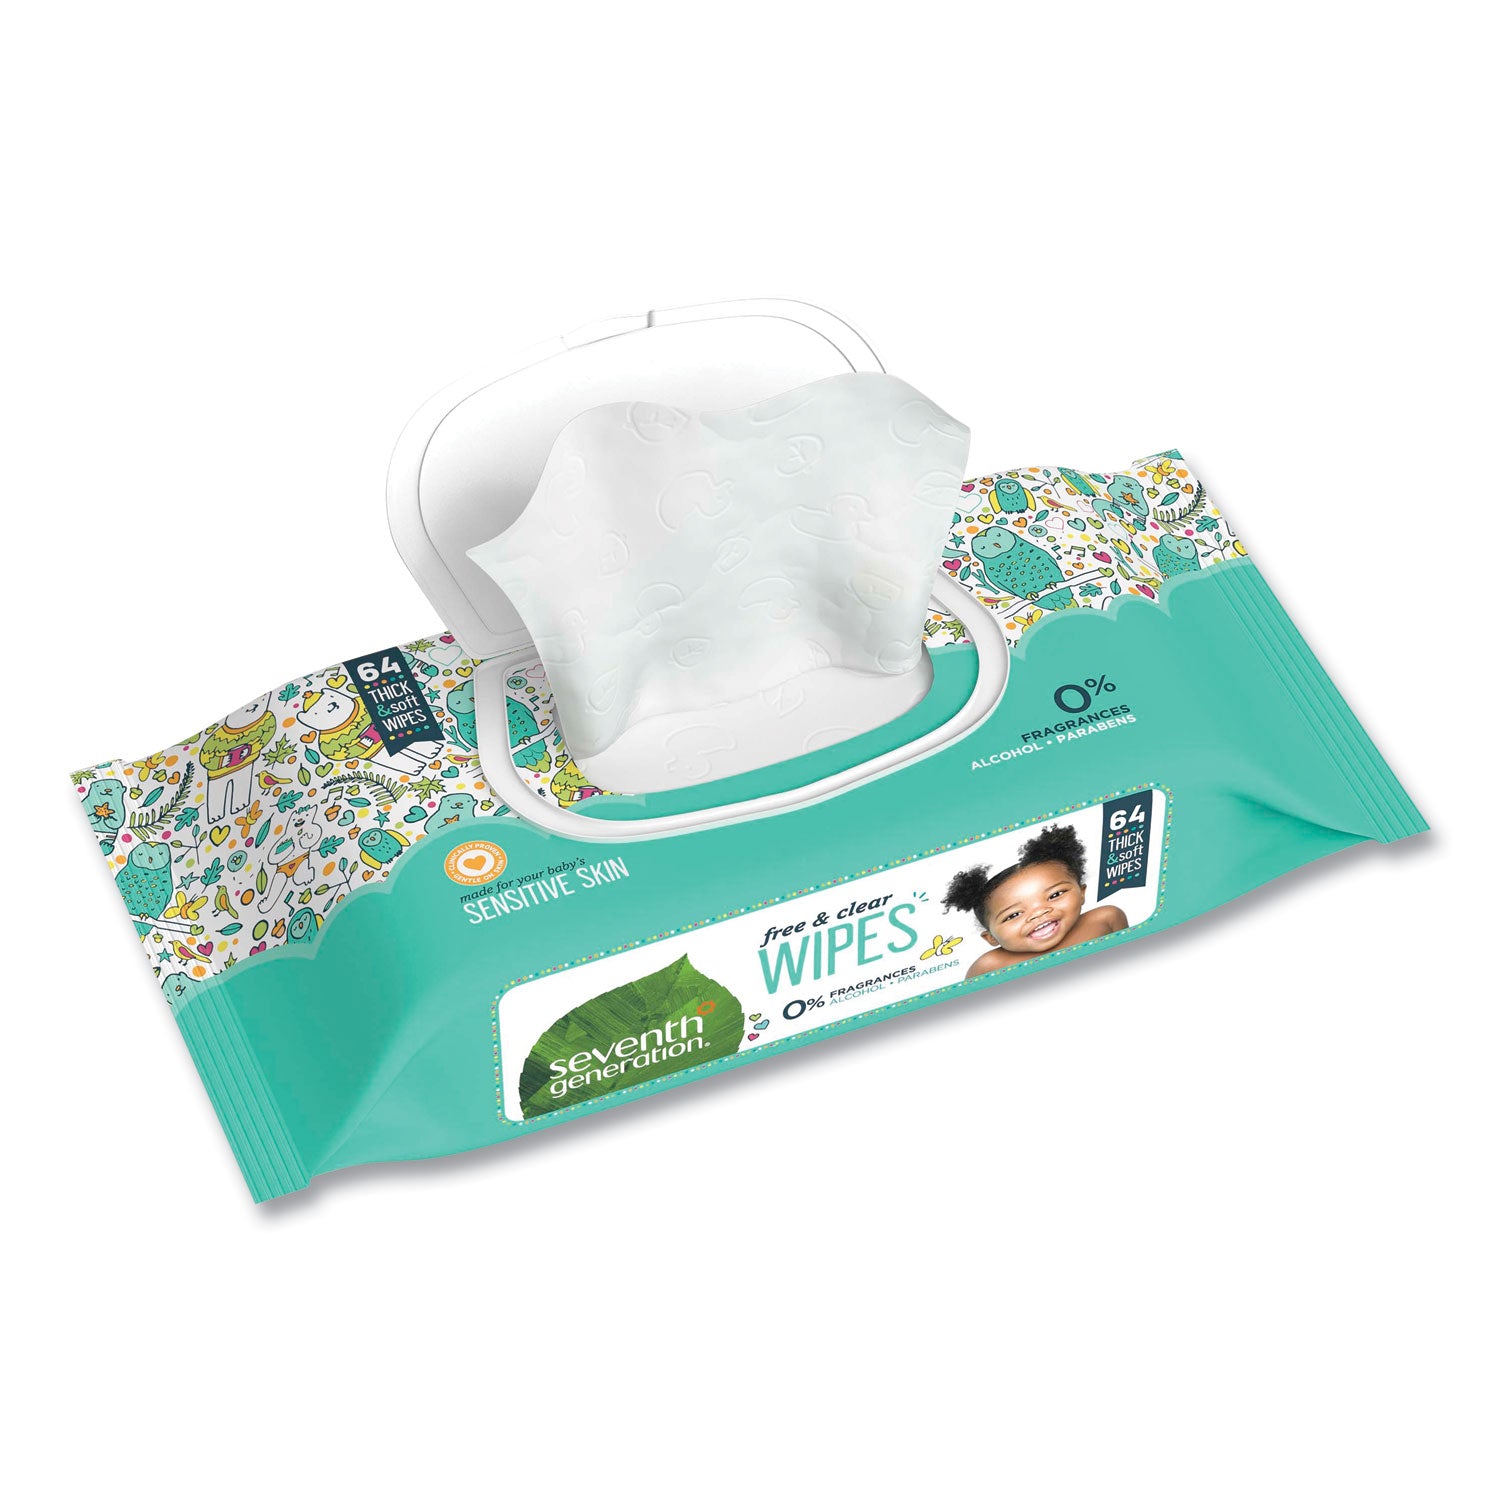 Free and Clear Baby Wipes, 7 x 7, Unscented, White, 64/Flip-Top Pack - 